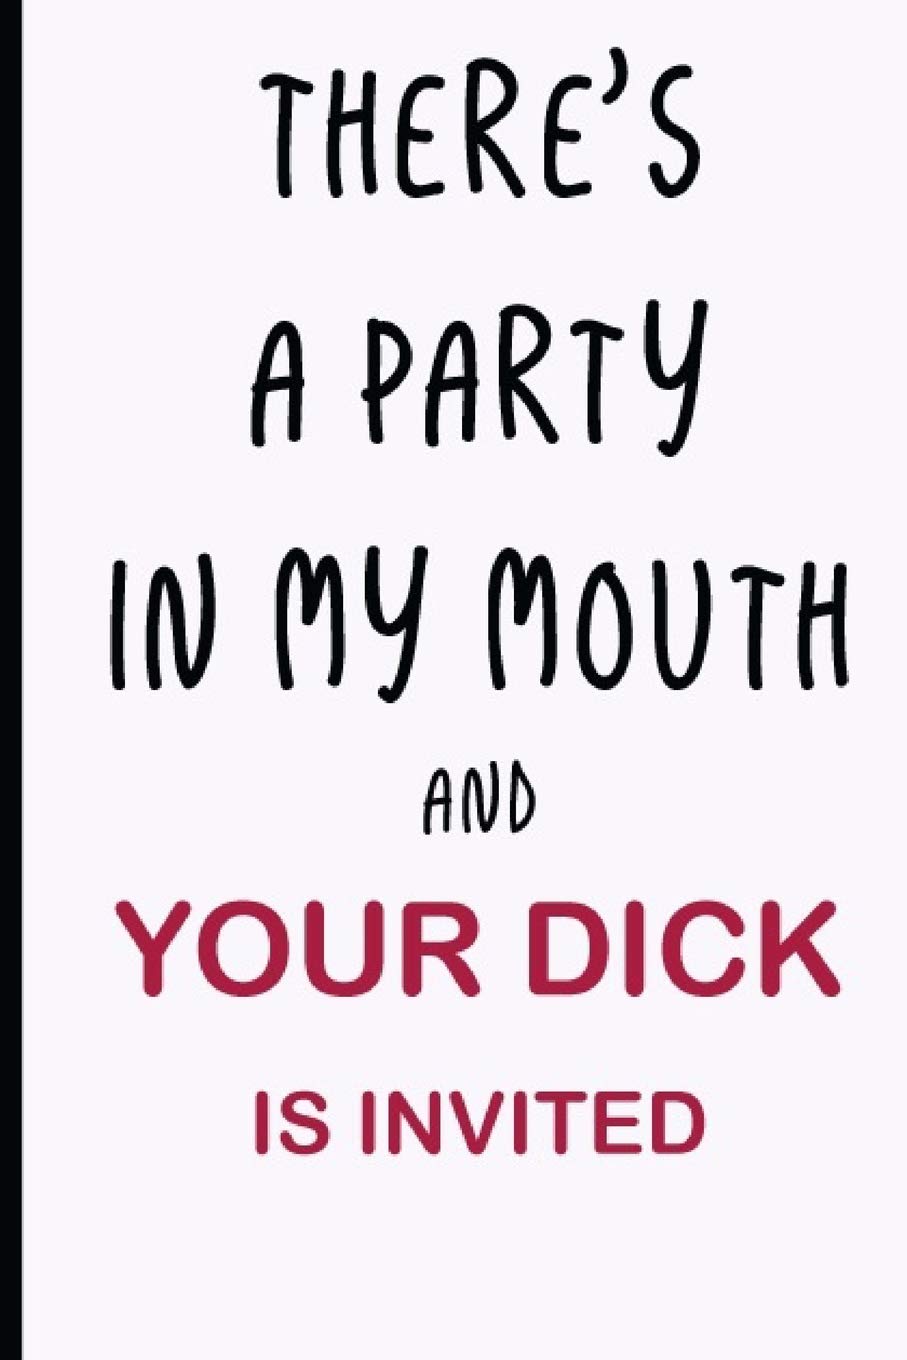 andrea dileo recommends your dick in my mouth pic